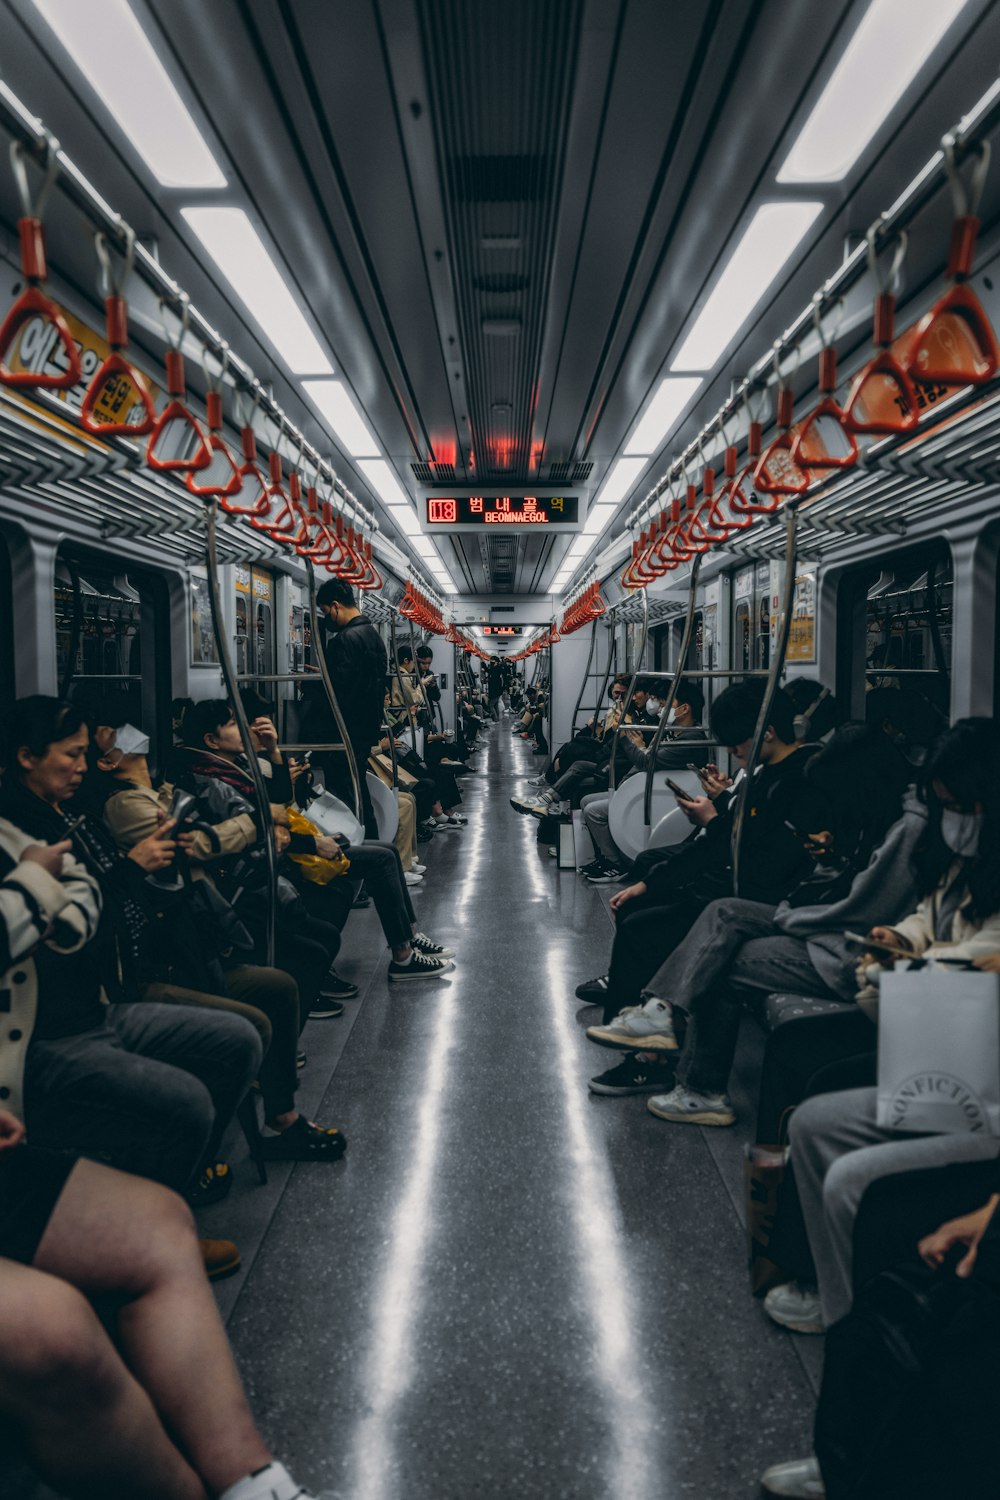 a group of people sitting on a subway train